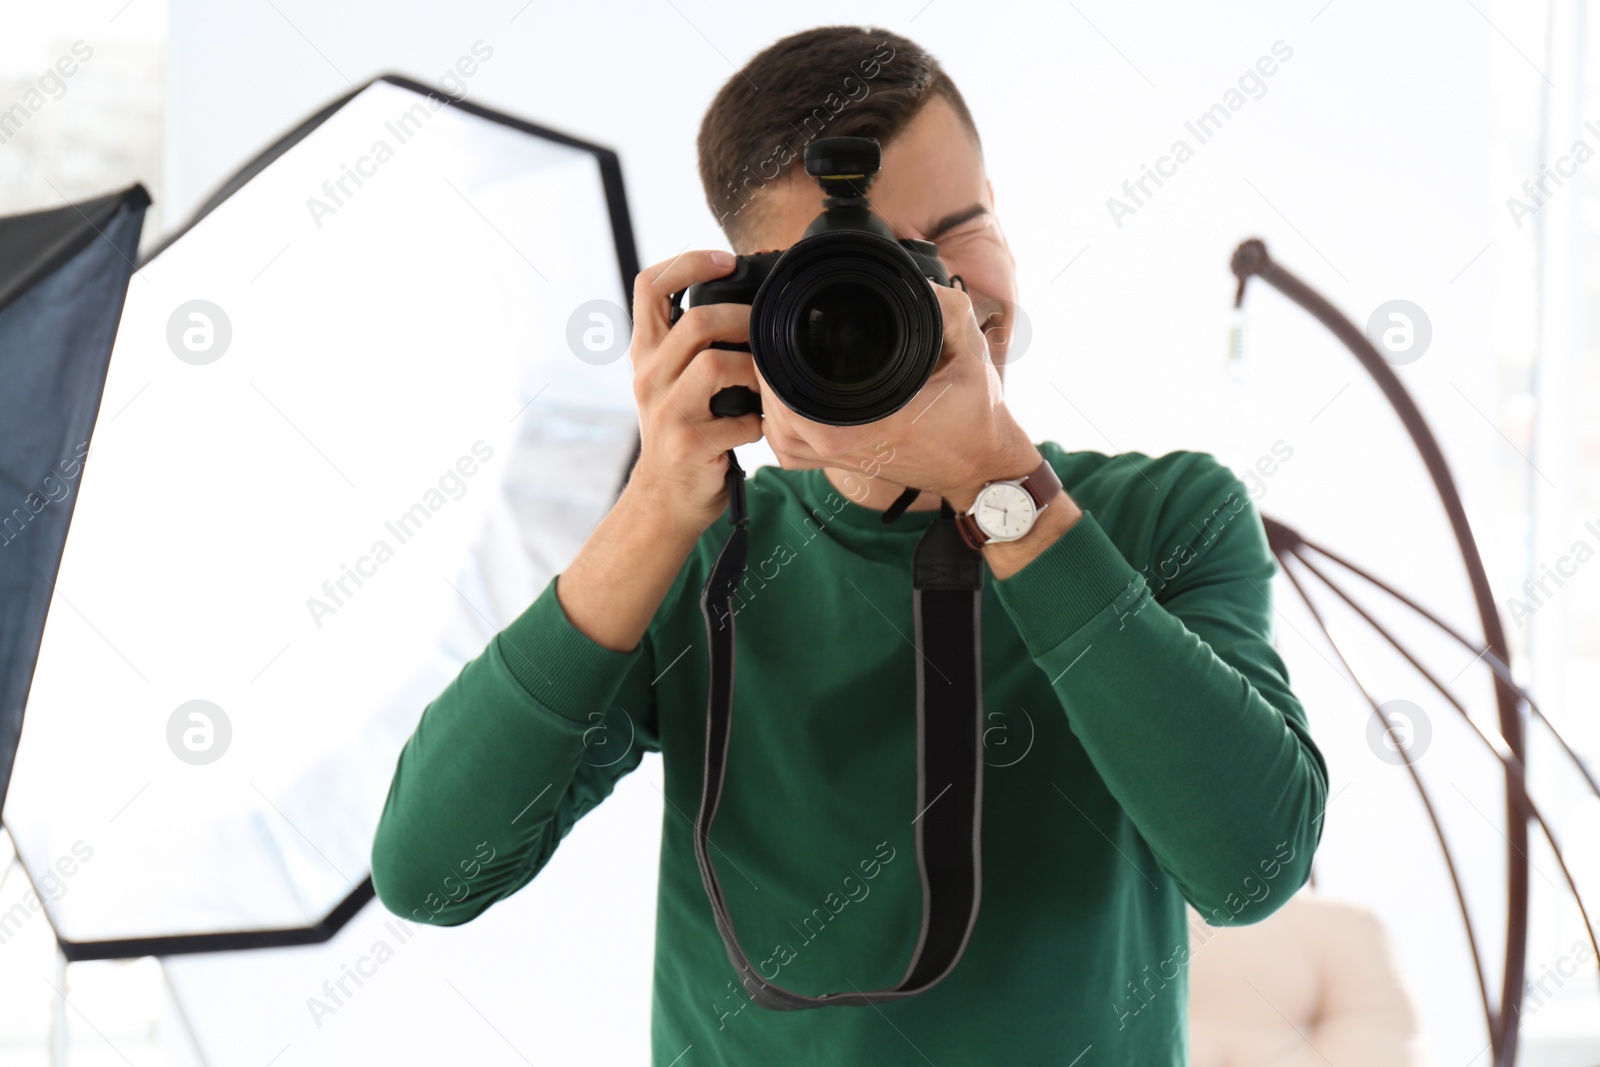 Photo of Young photographer working in professional studio